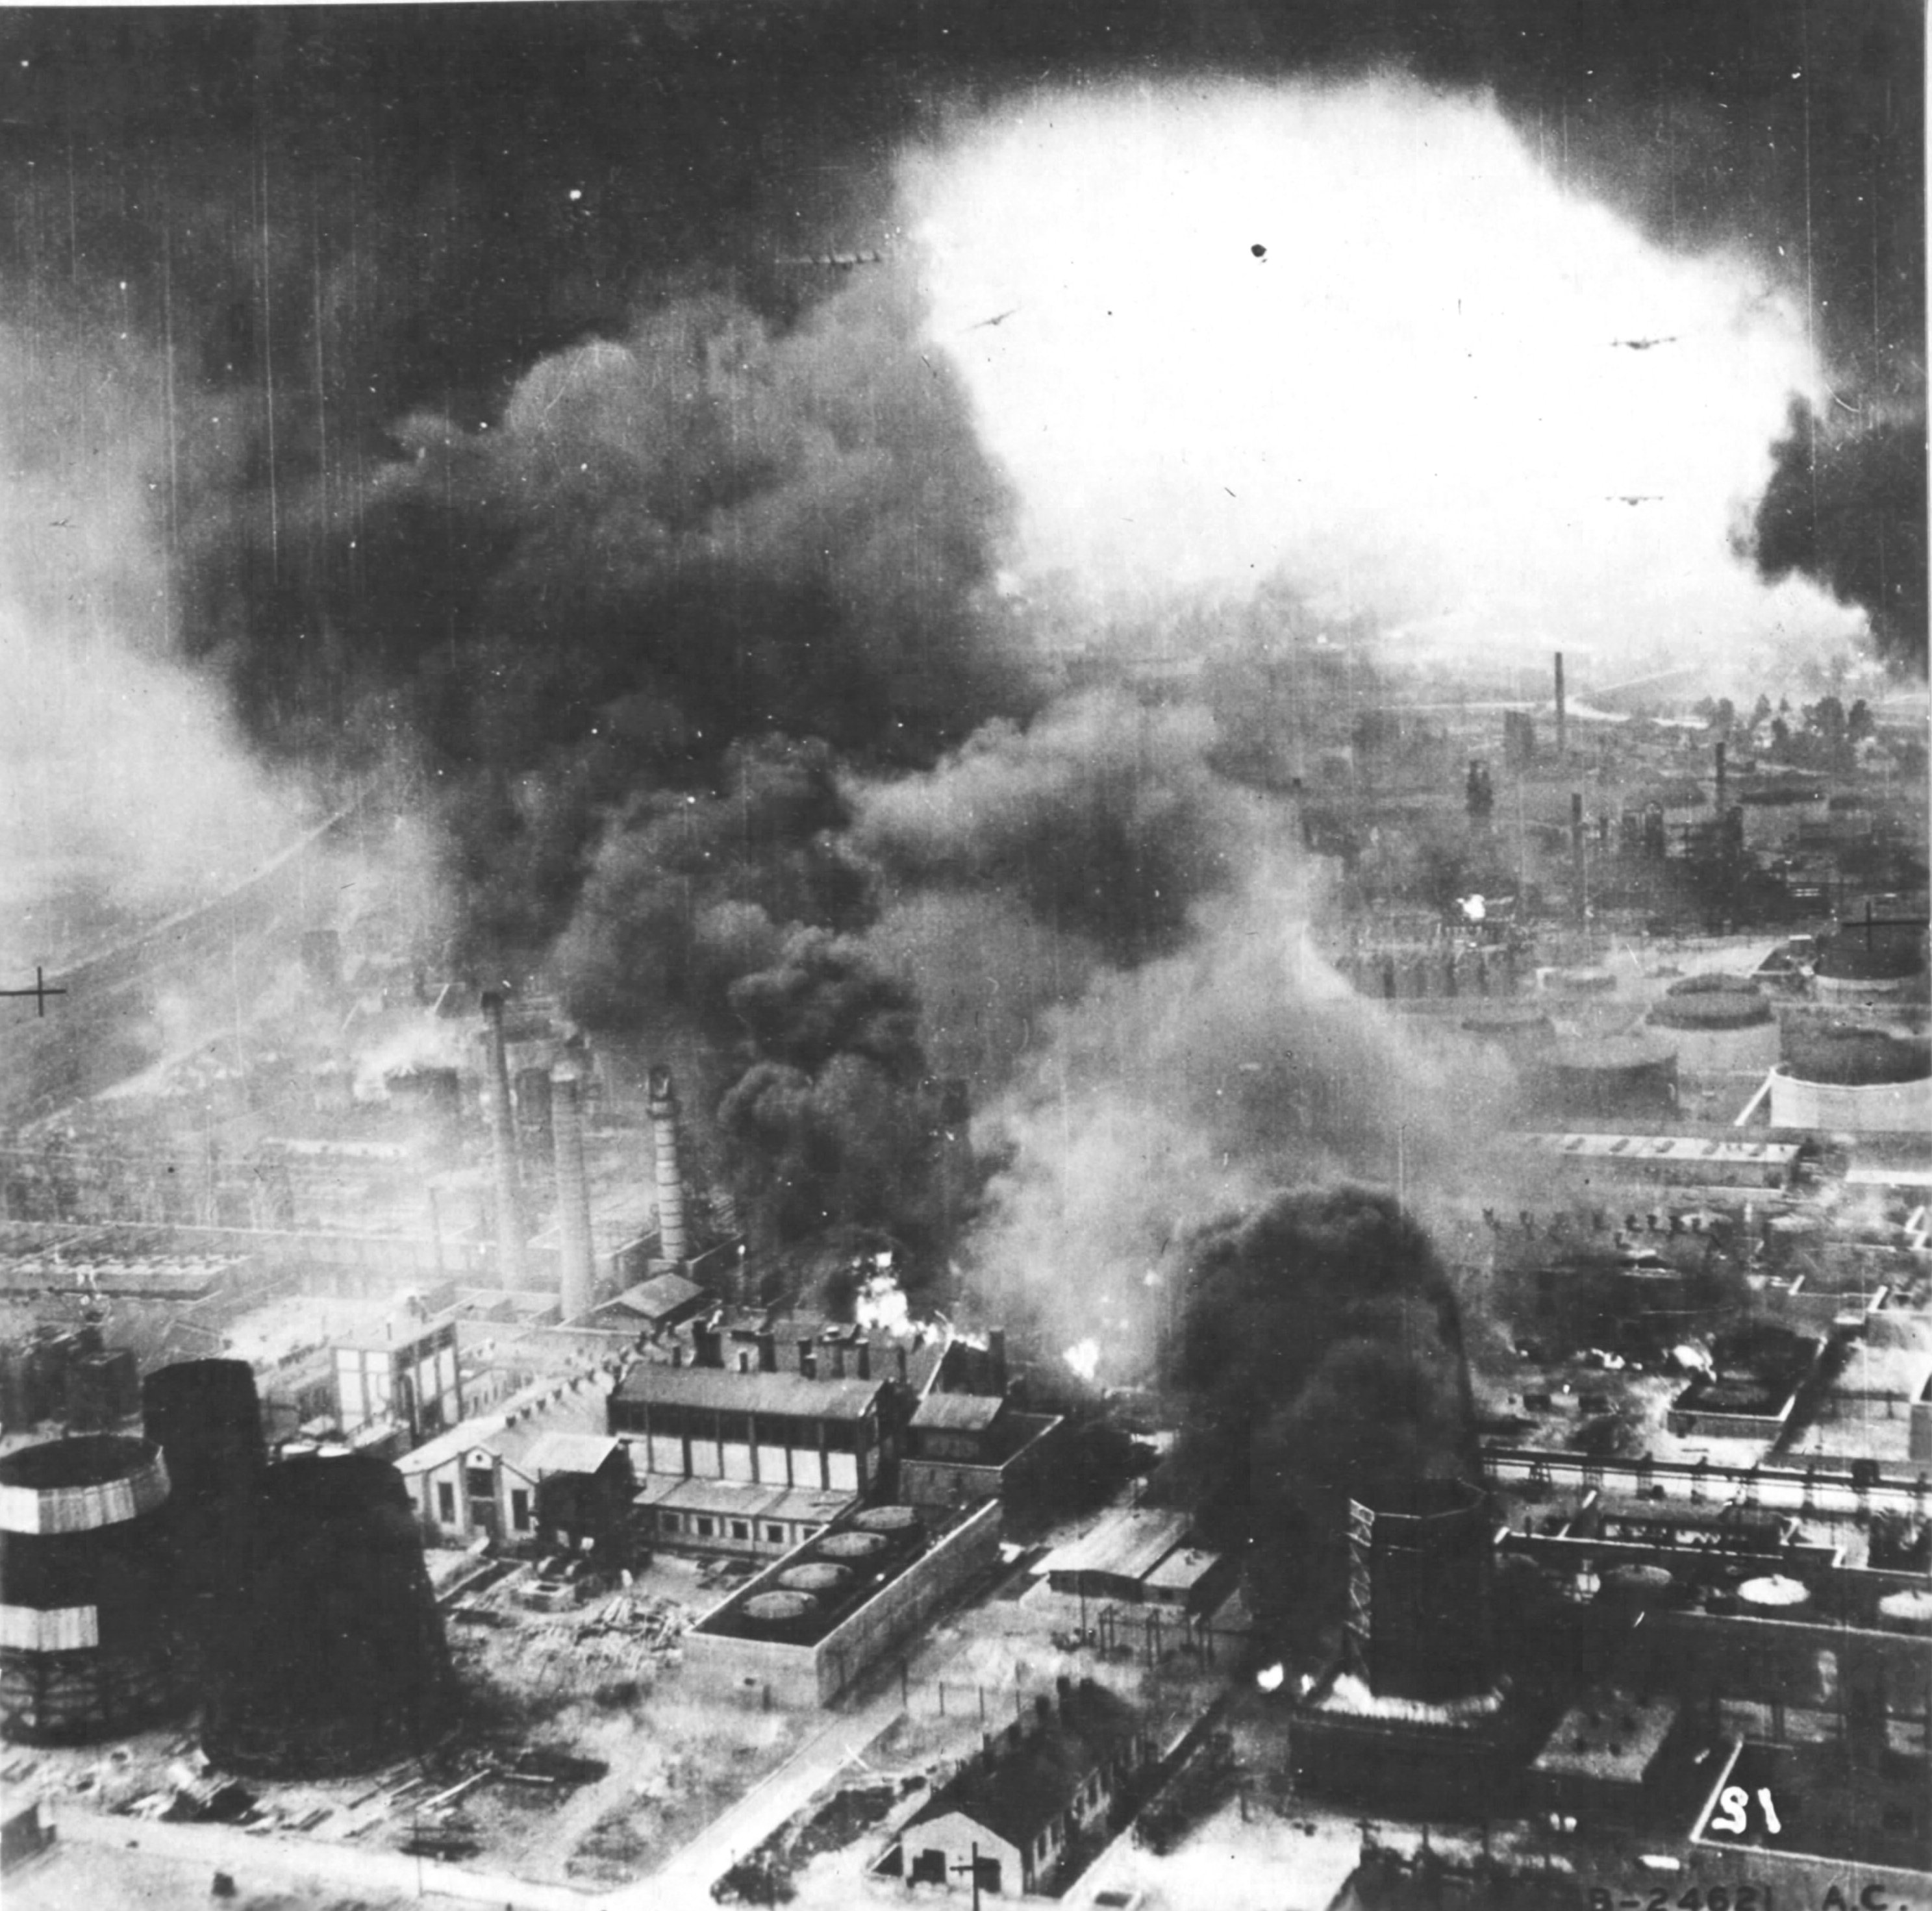 Smoke rises from the Astra Romana refinery in Ploesti Romania following low level bombing attack by B-24 Liberators, Aug 1 1943.